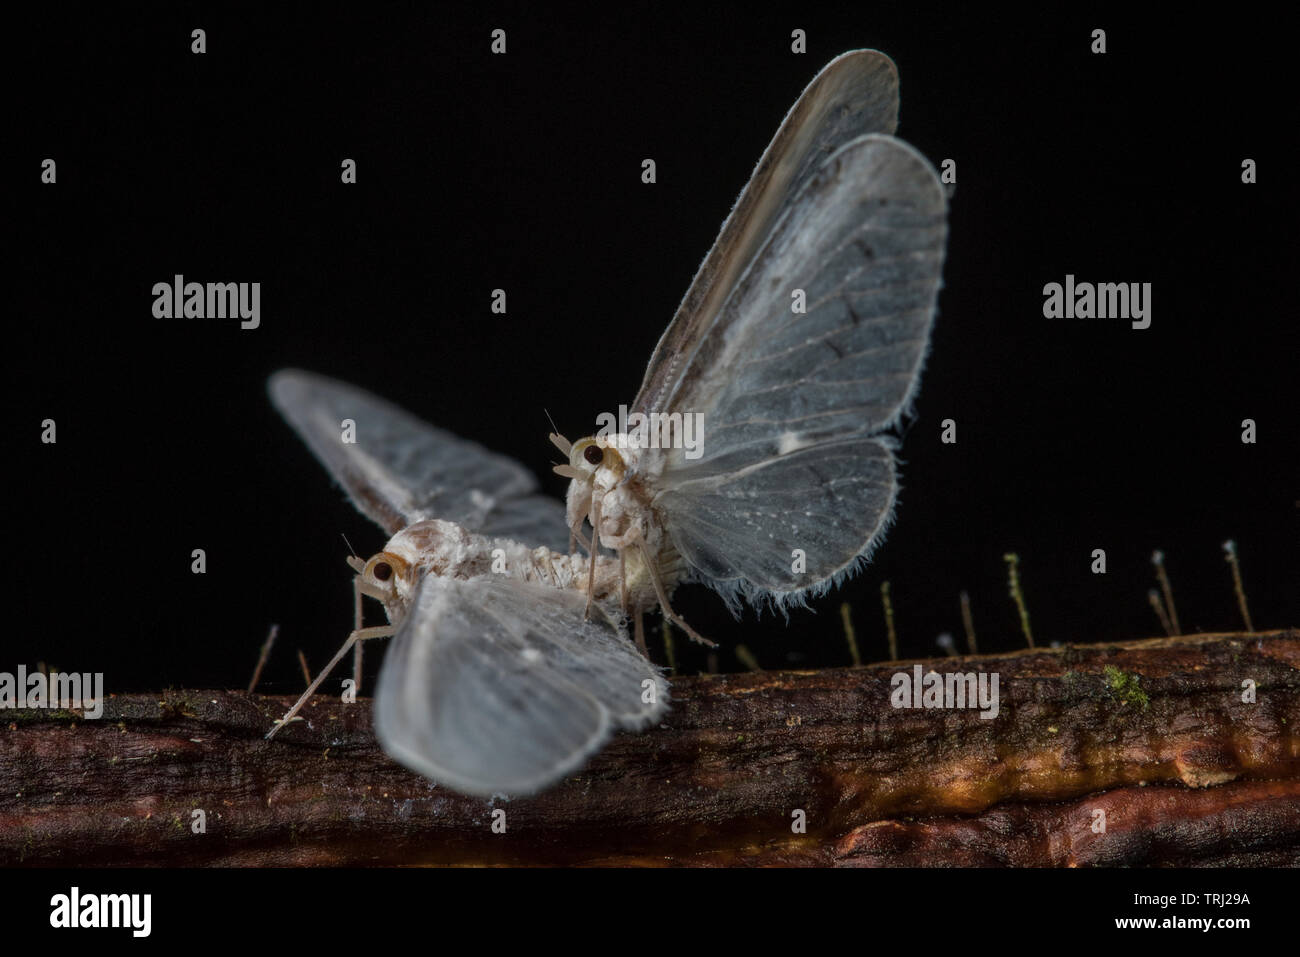 A pair of derbid planthoppers reproducing on the stem of a plant in the Ecuadorian rainforest. Stock Photo